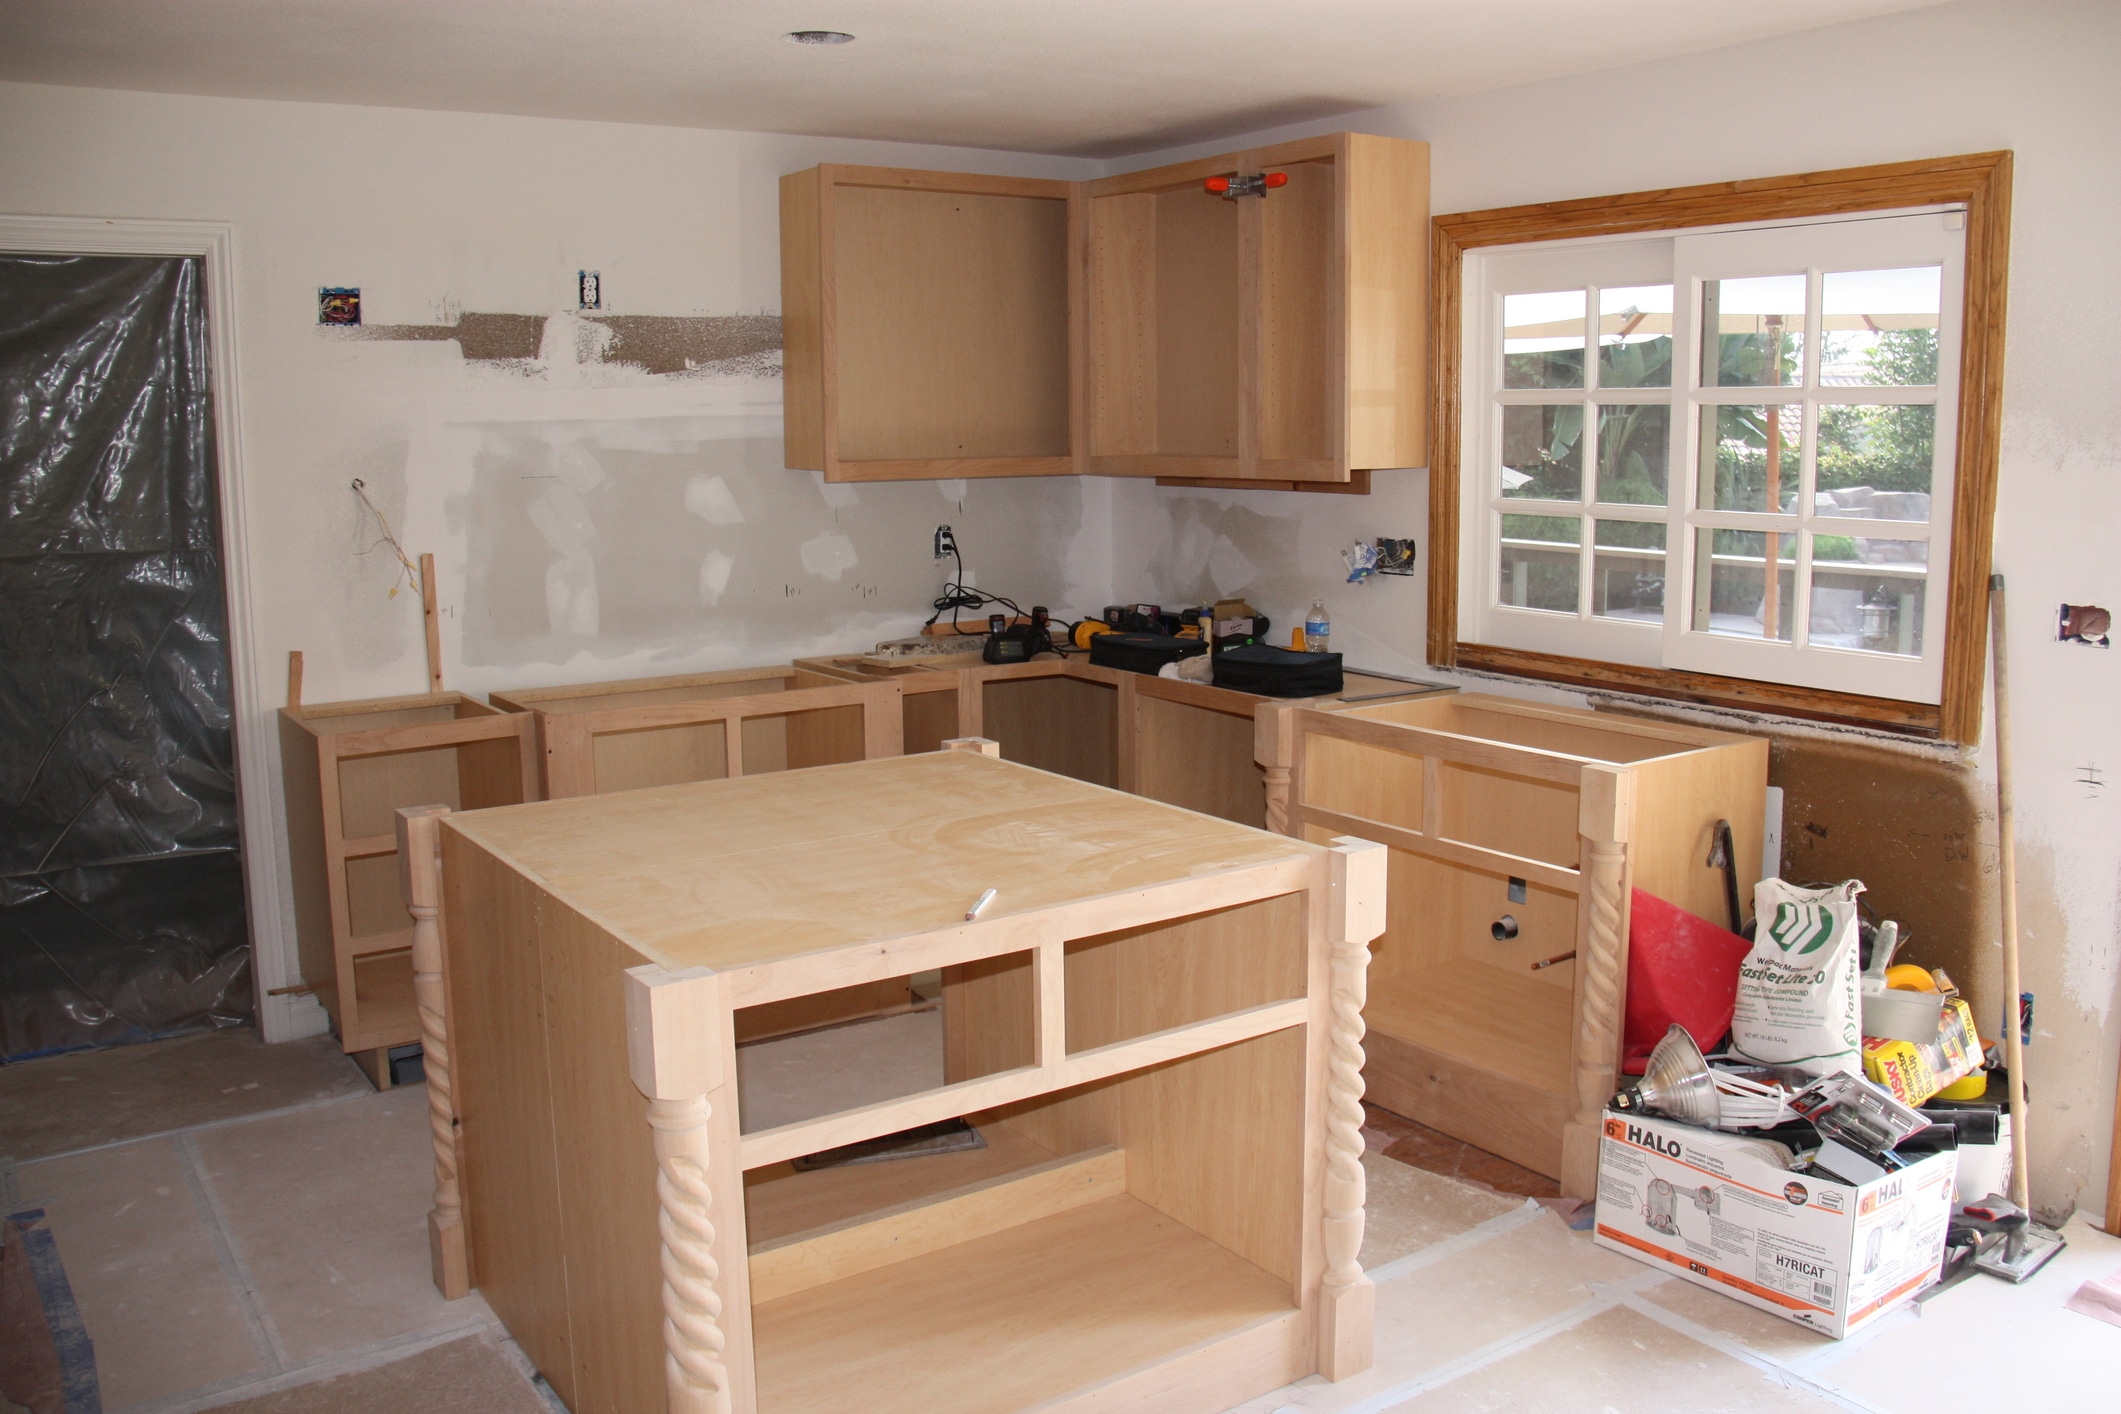 decide on the scope of the kitchen renovation project before hiring